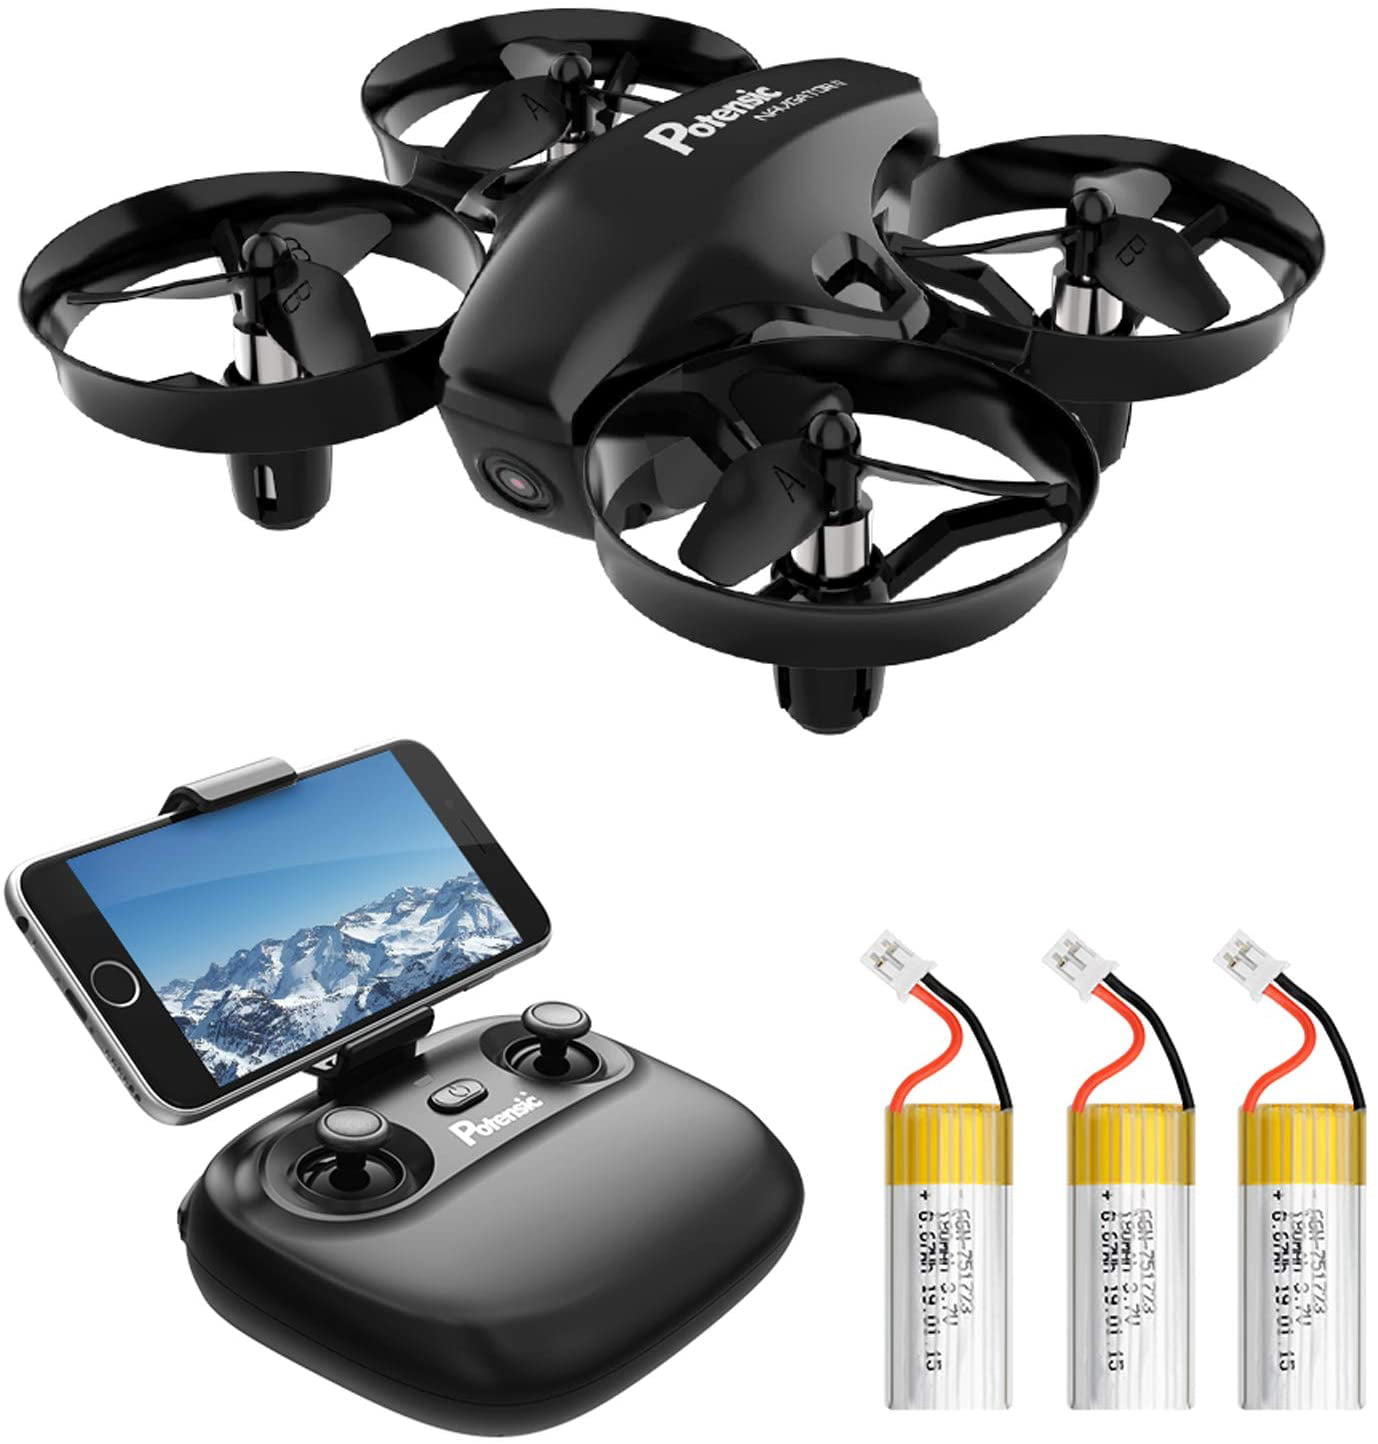 Potensic A20W Mini Camera Drone for Beginners